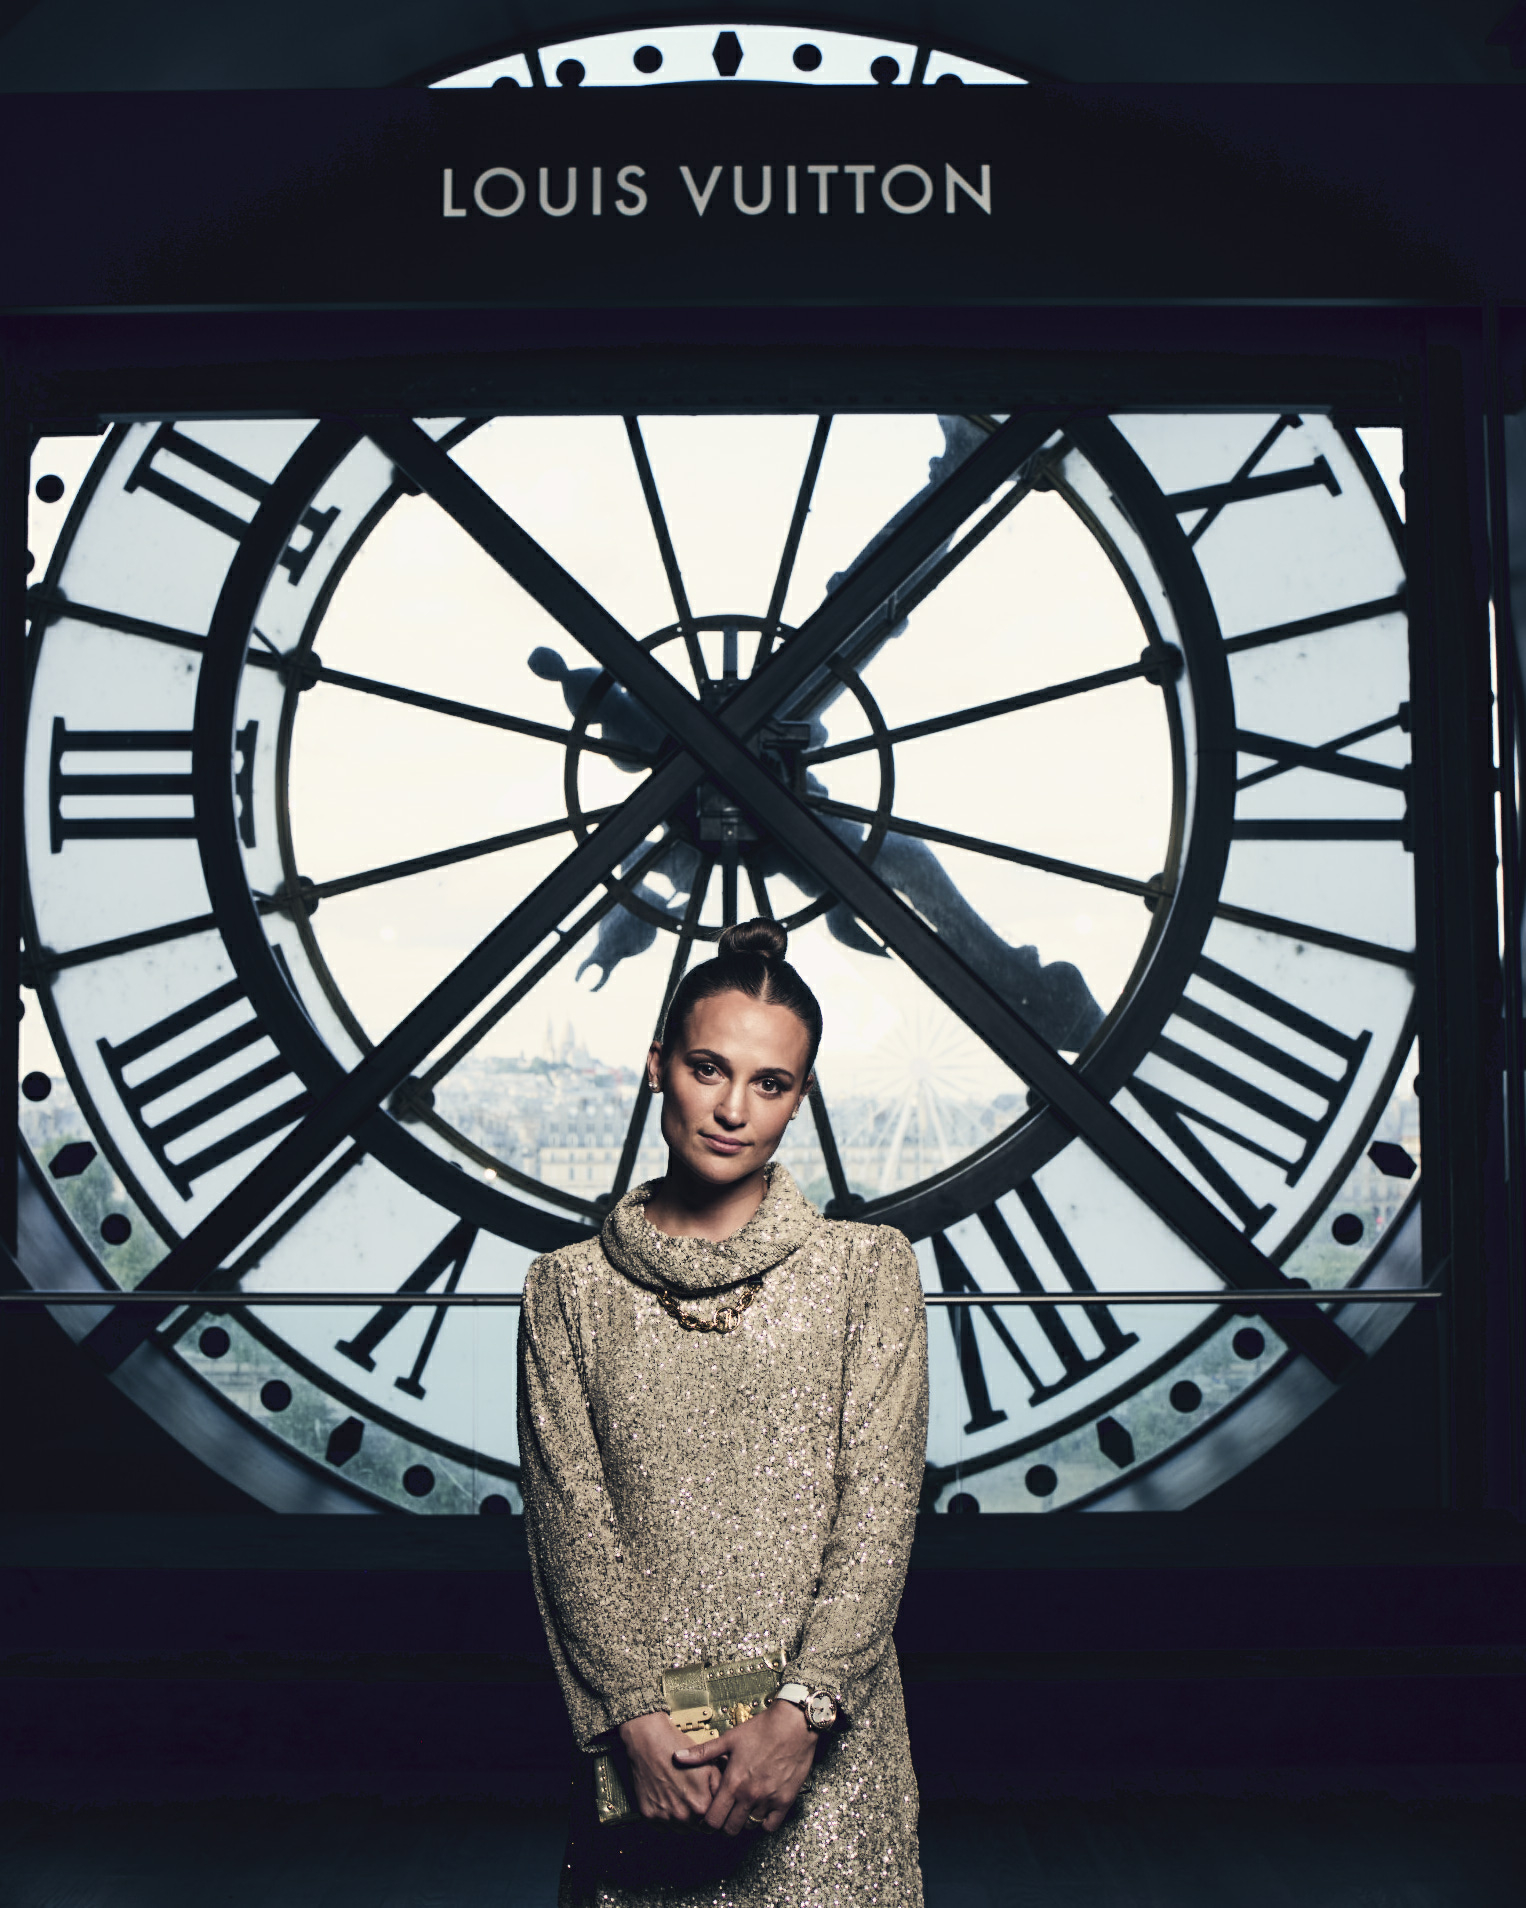 Louis Vuitton Launches Connected Watch With Google – WWD